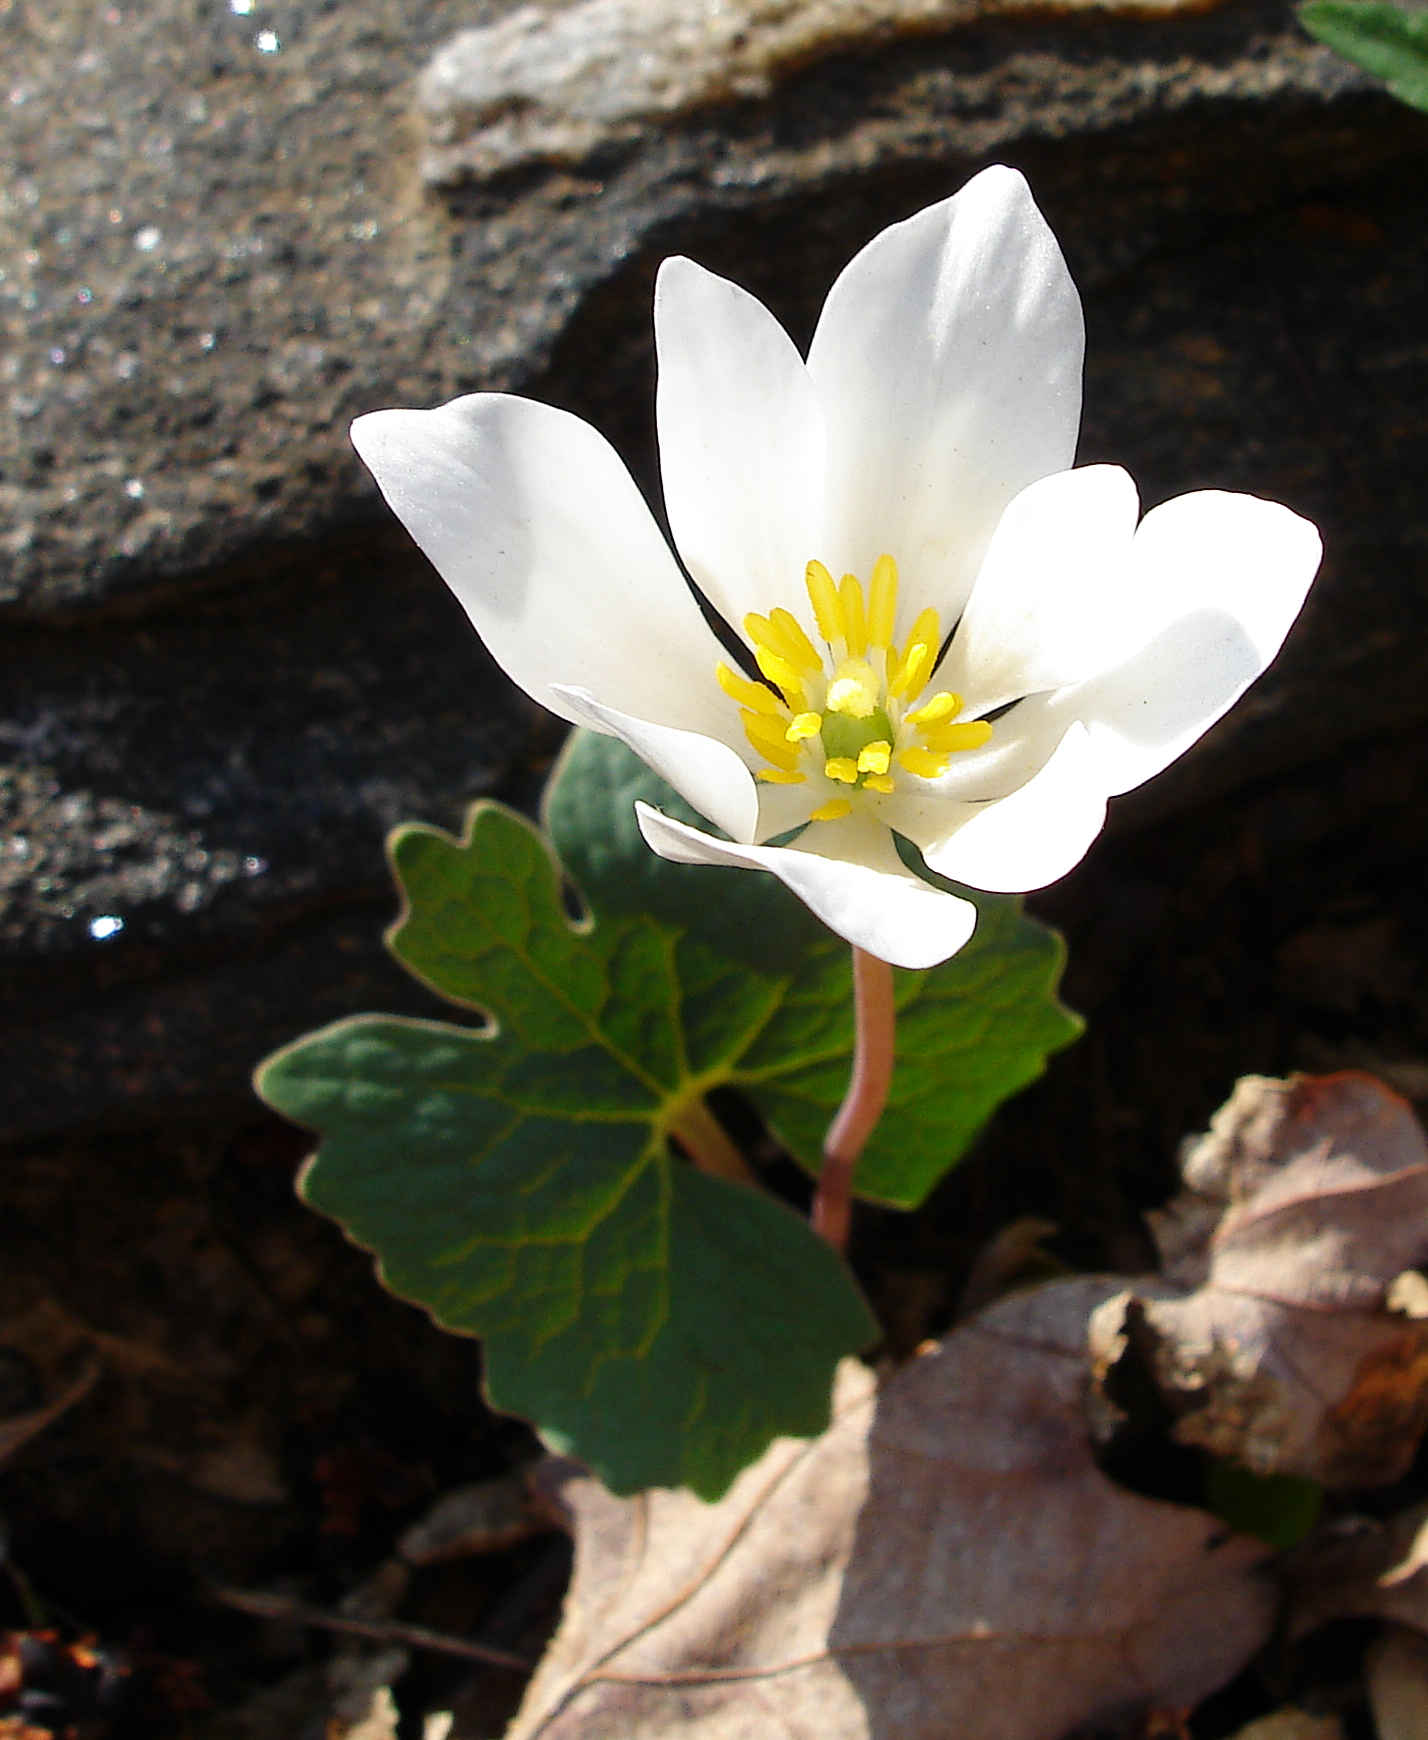 bloodroot pics4learning